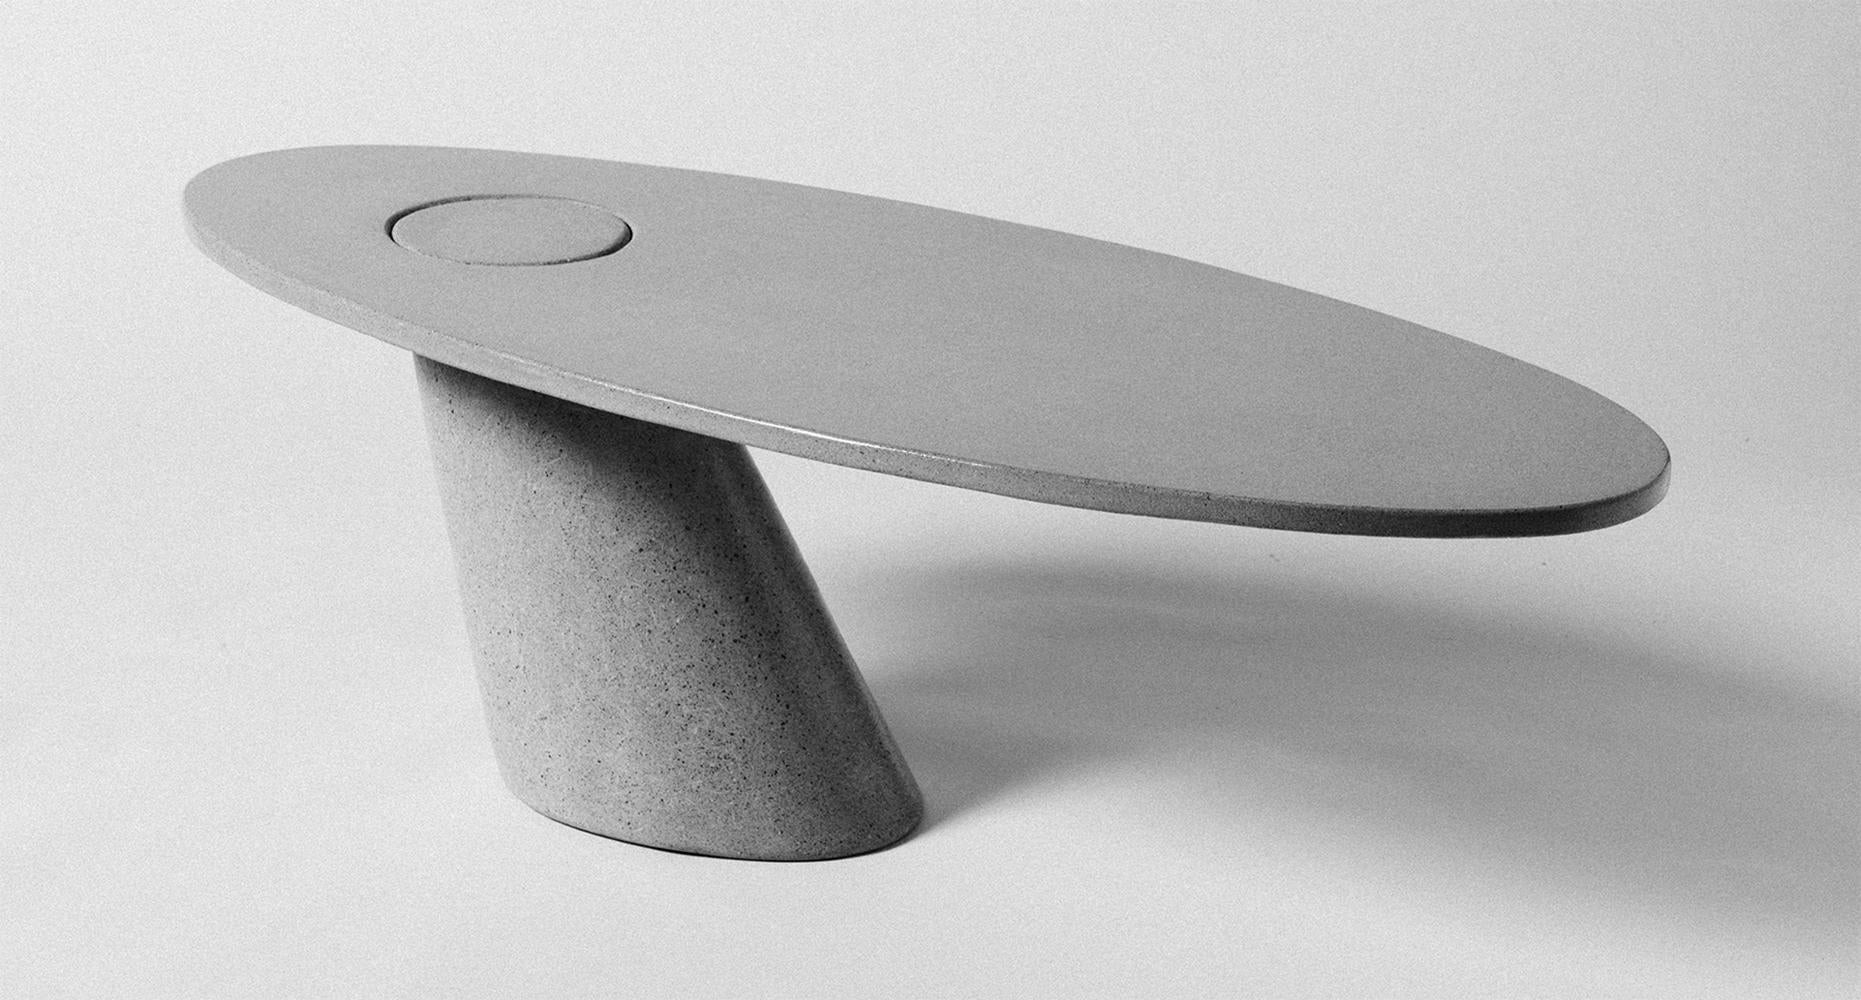 A play on balance, this table is constructed entirely of two concrete pieces. The tabletop is singly supported by the leg, while the two merge with gravity to lock into place. Their balance is a sight to behold.

Suitable for indoor and outdoor